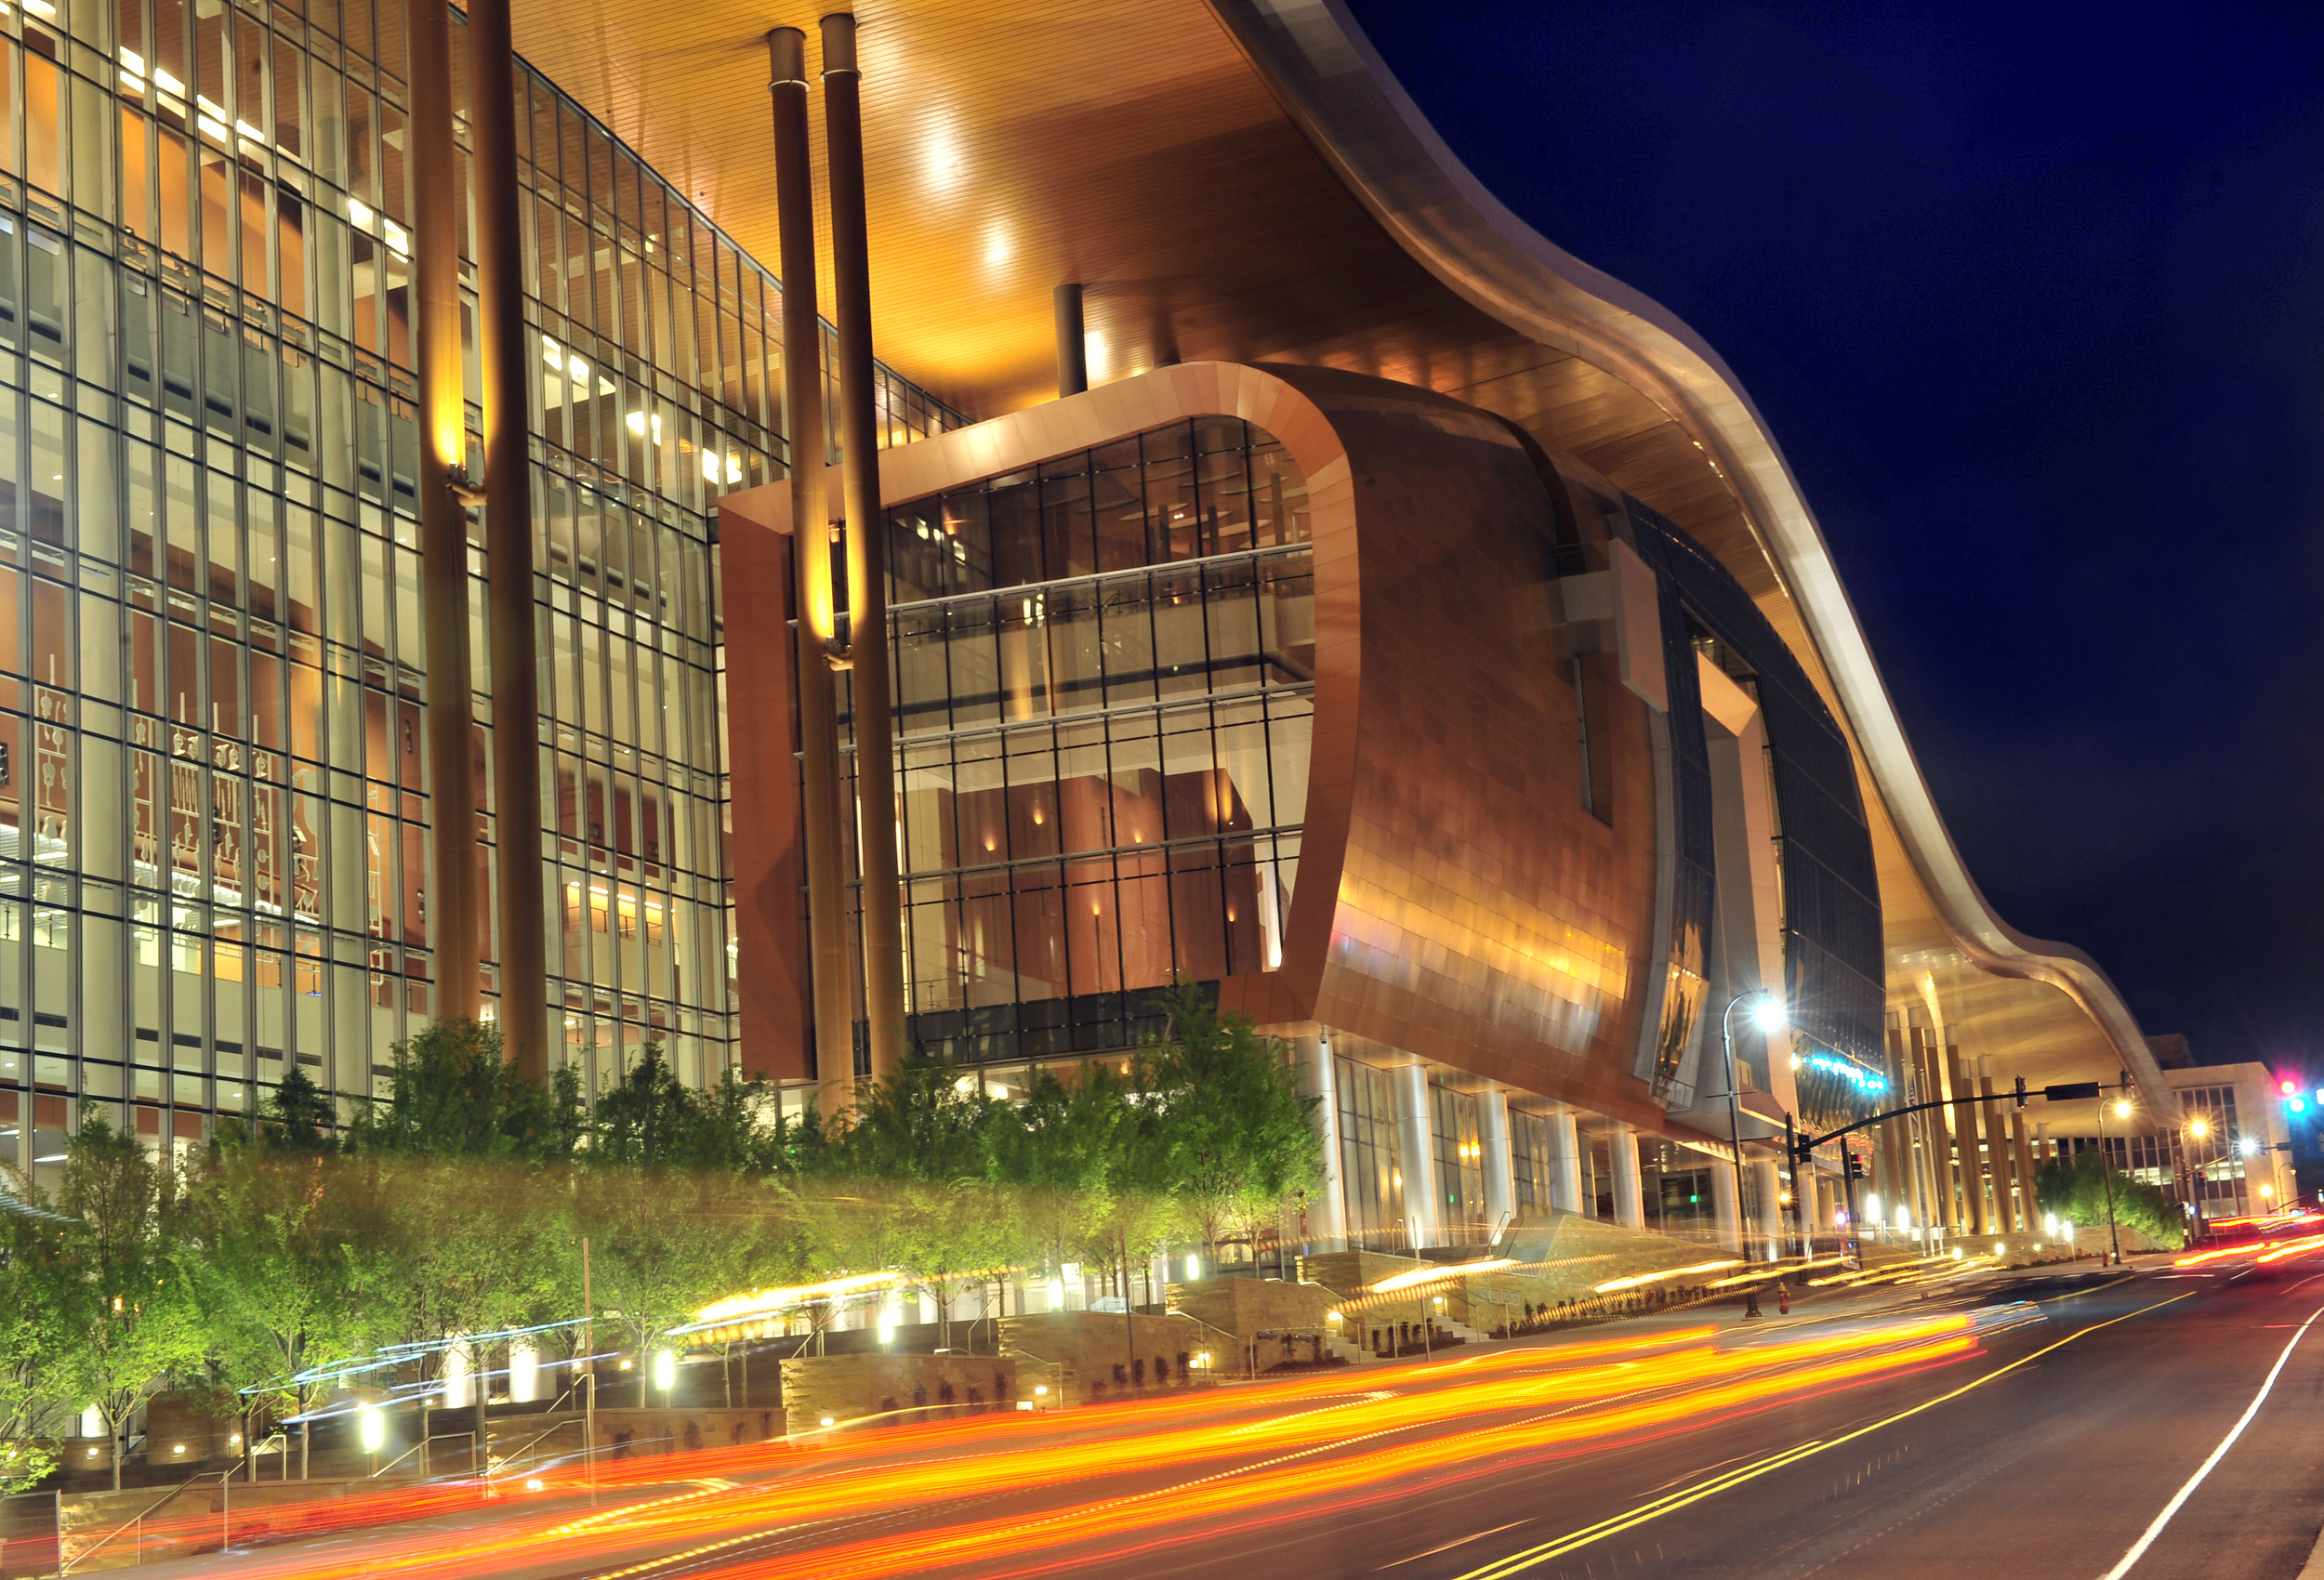  The Music City Center convention hall in Nashville, Tenn. 